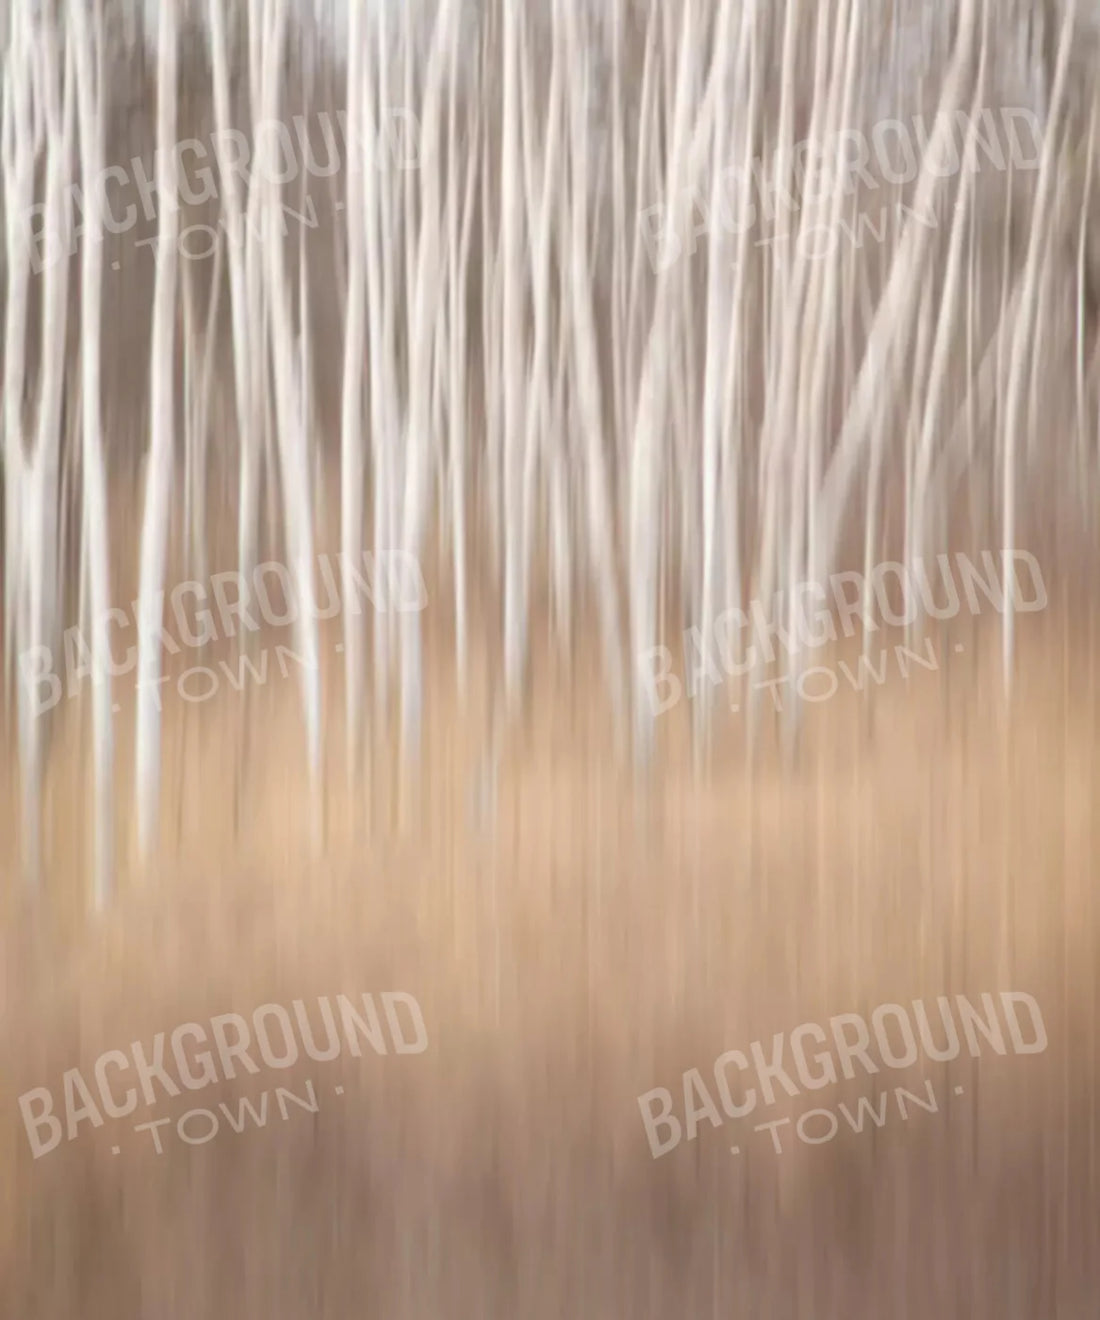 Aspen Birch trees  Backdrop for Photography